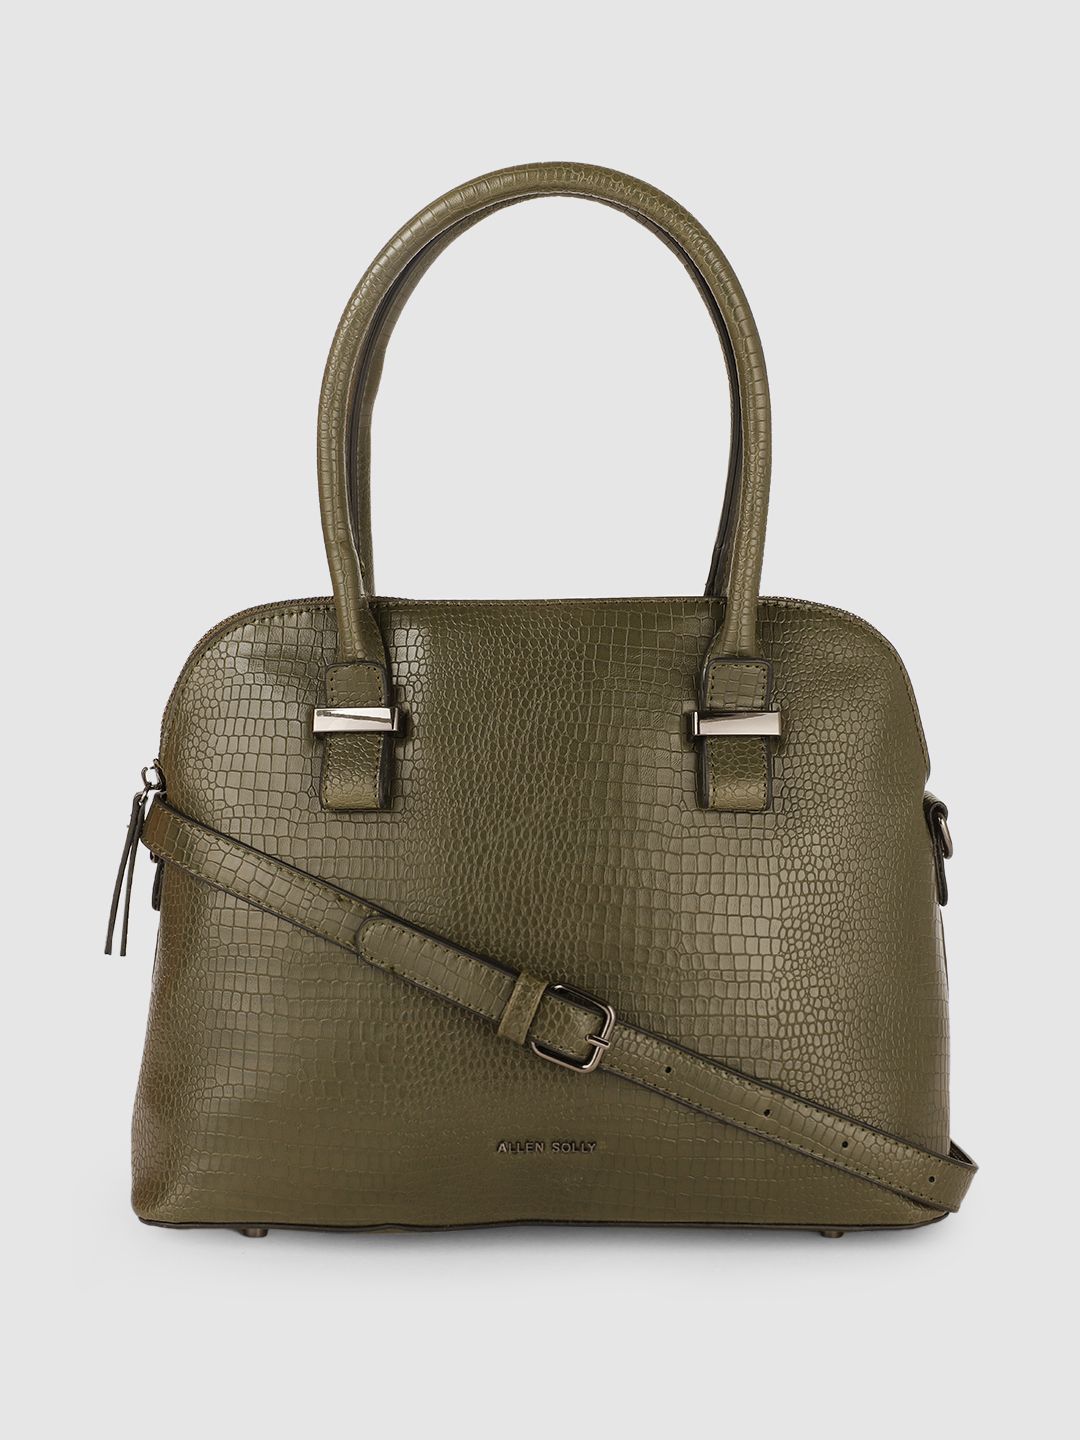 Allen Solly Olive Green Textured PU Structured Handheld Bag Price in India